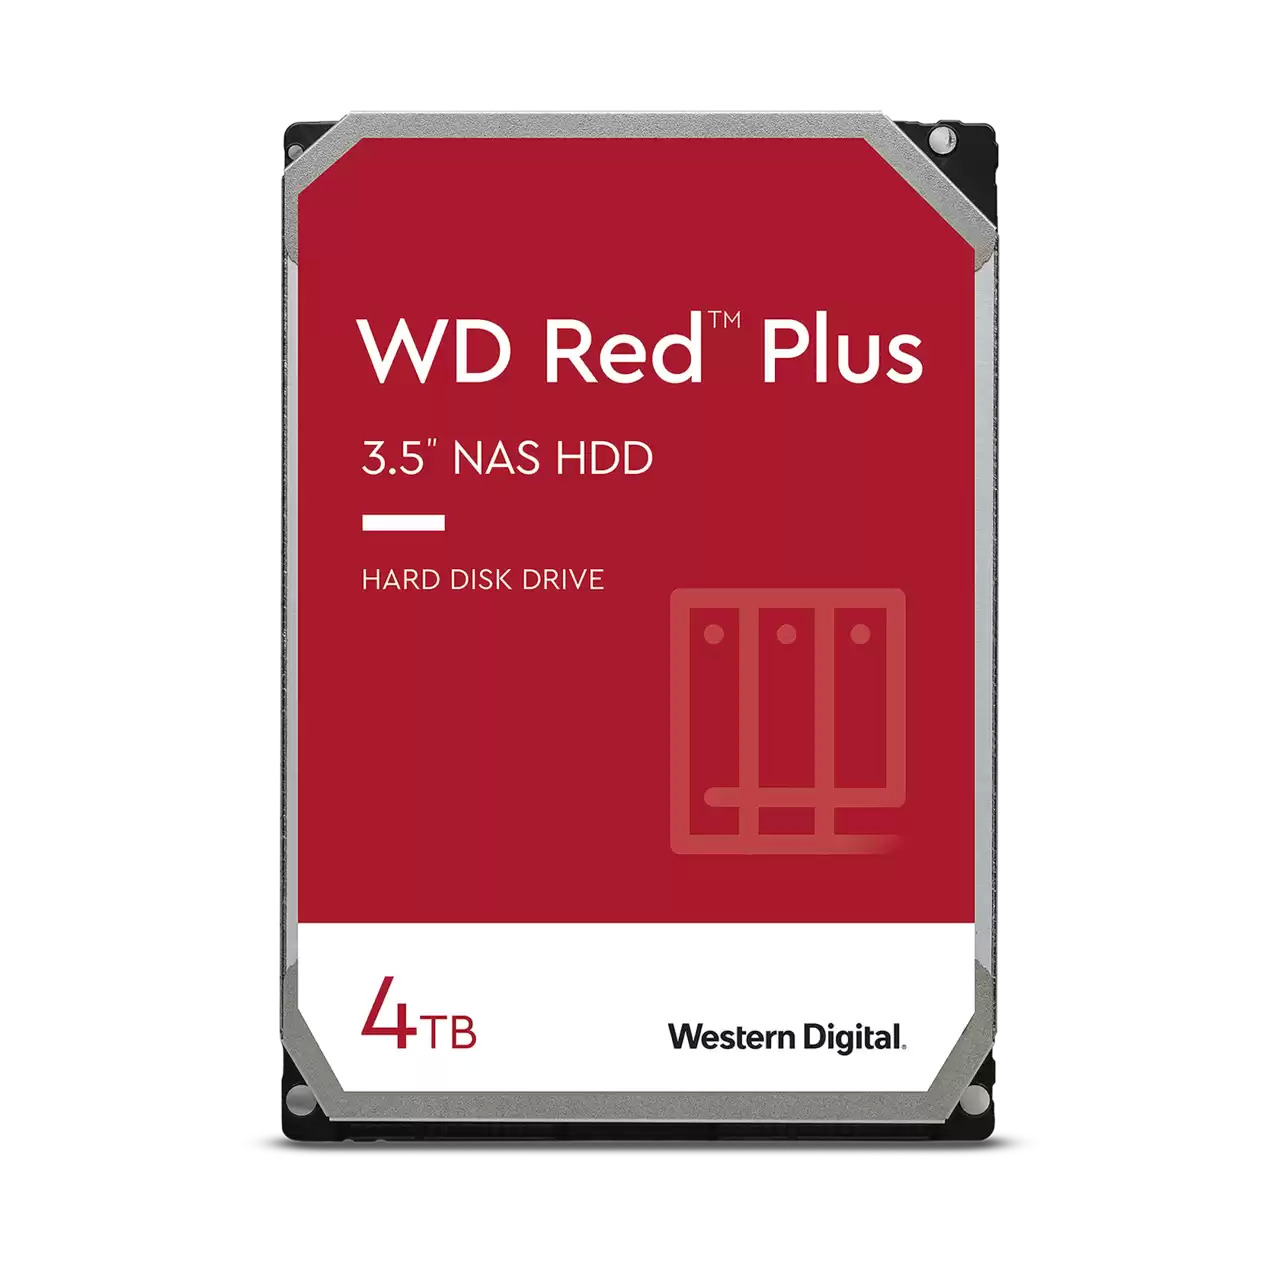 4TB WD Red Plus 5640 RPM SATA 3.5" NAS Hard Disk Drive $70 + Free Shipping